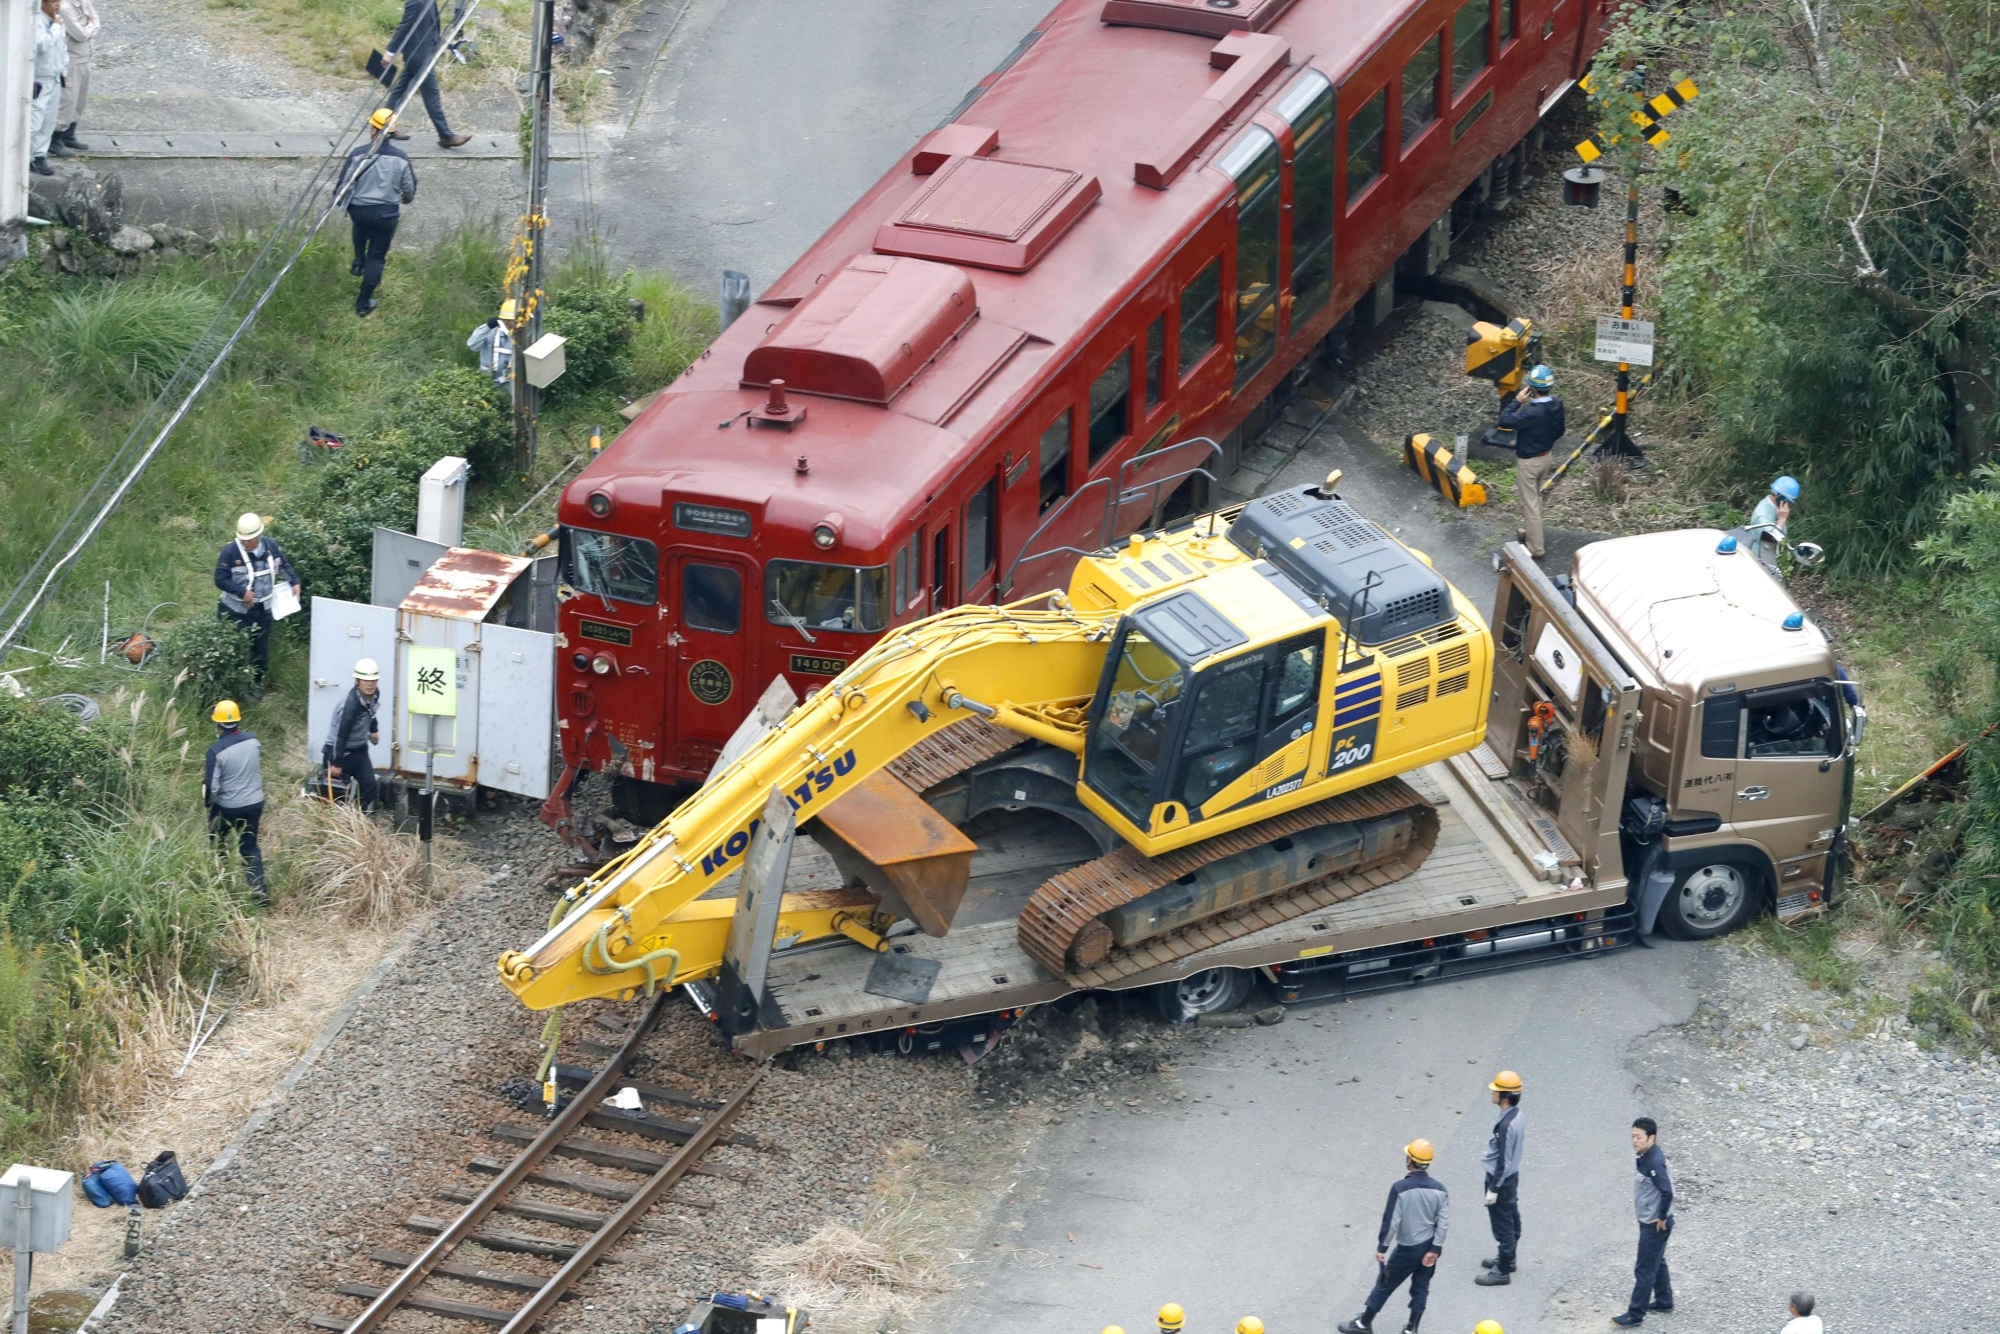 11 hurt after Kumamoto train hits trailer truck at crossing The Japan